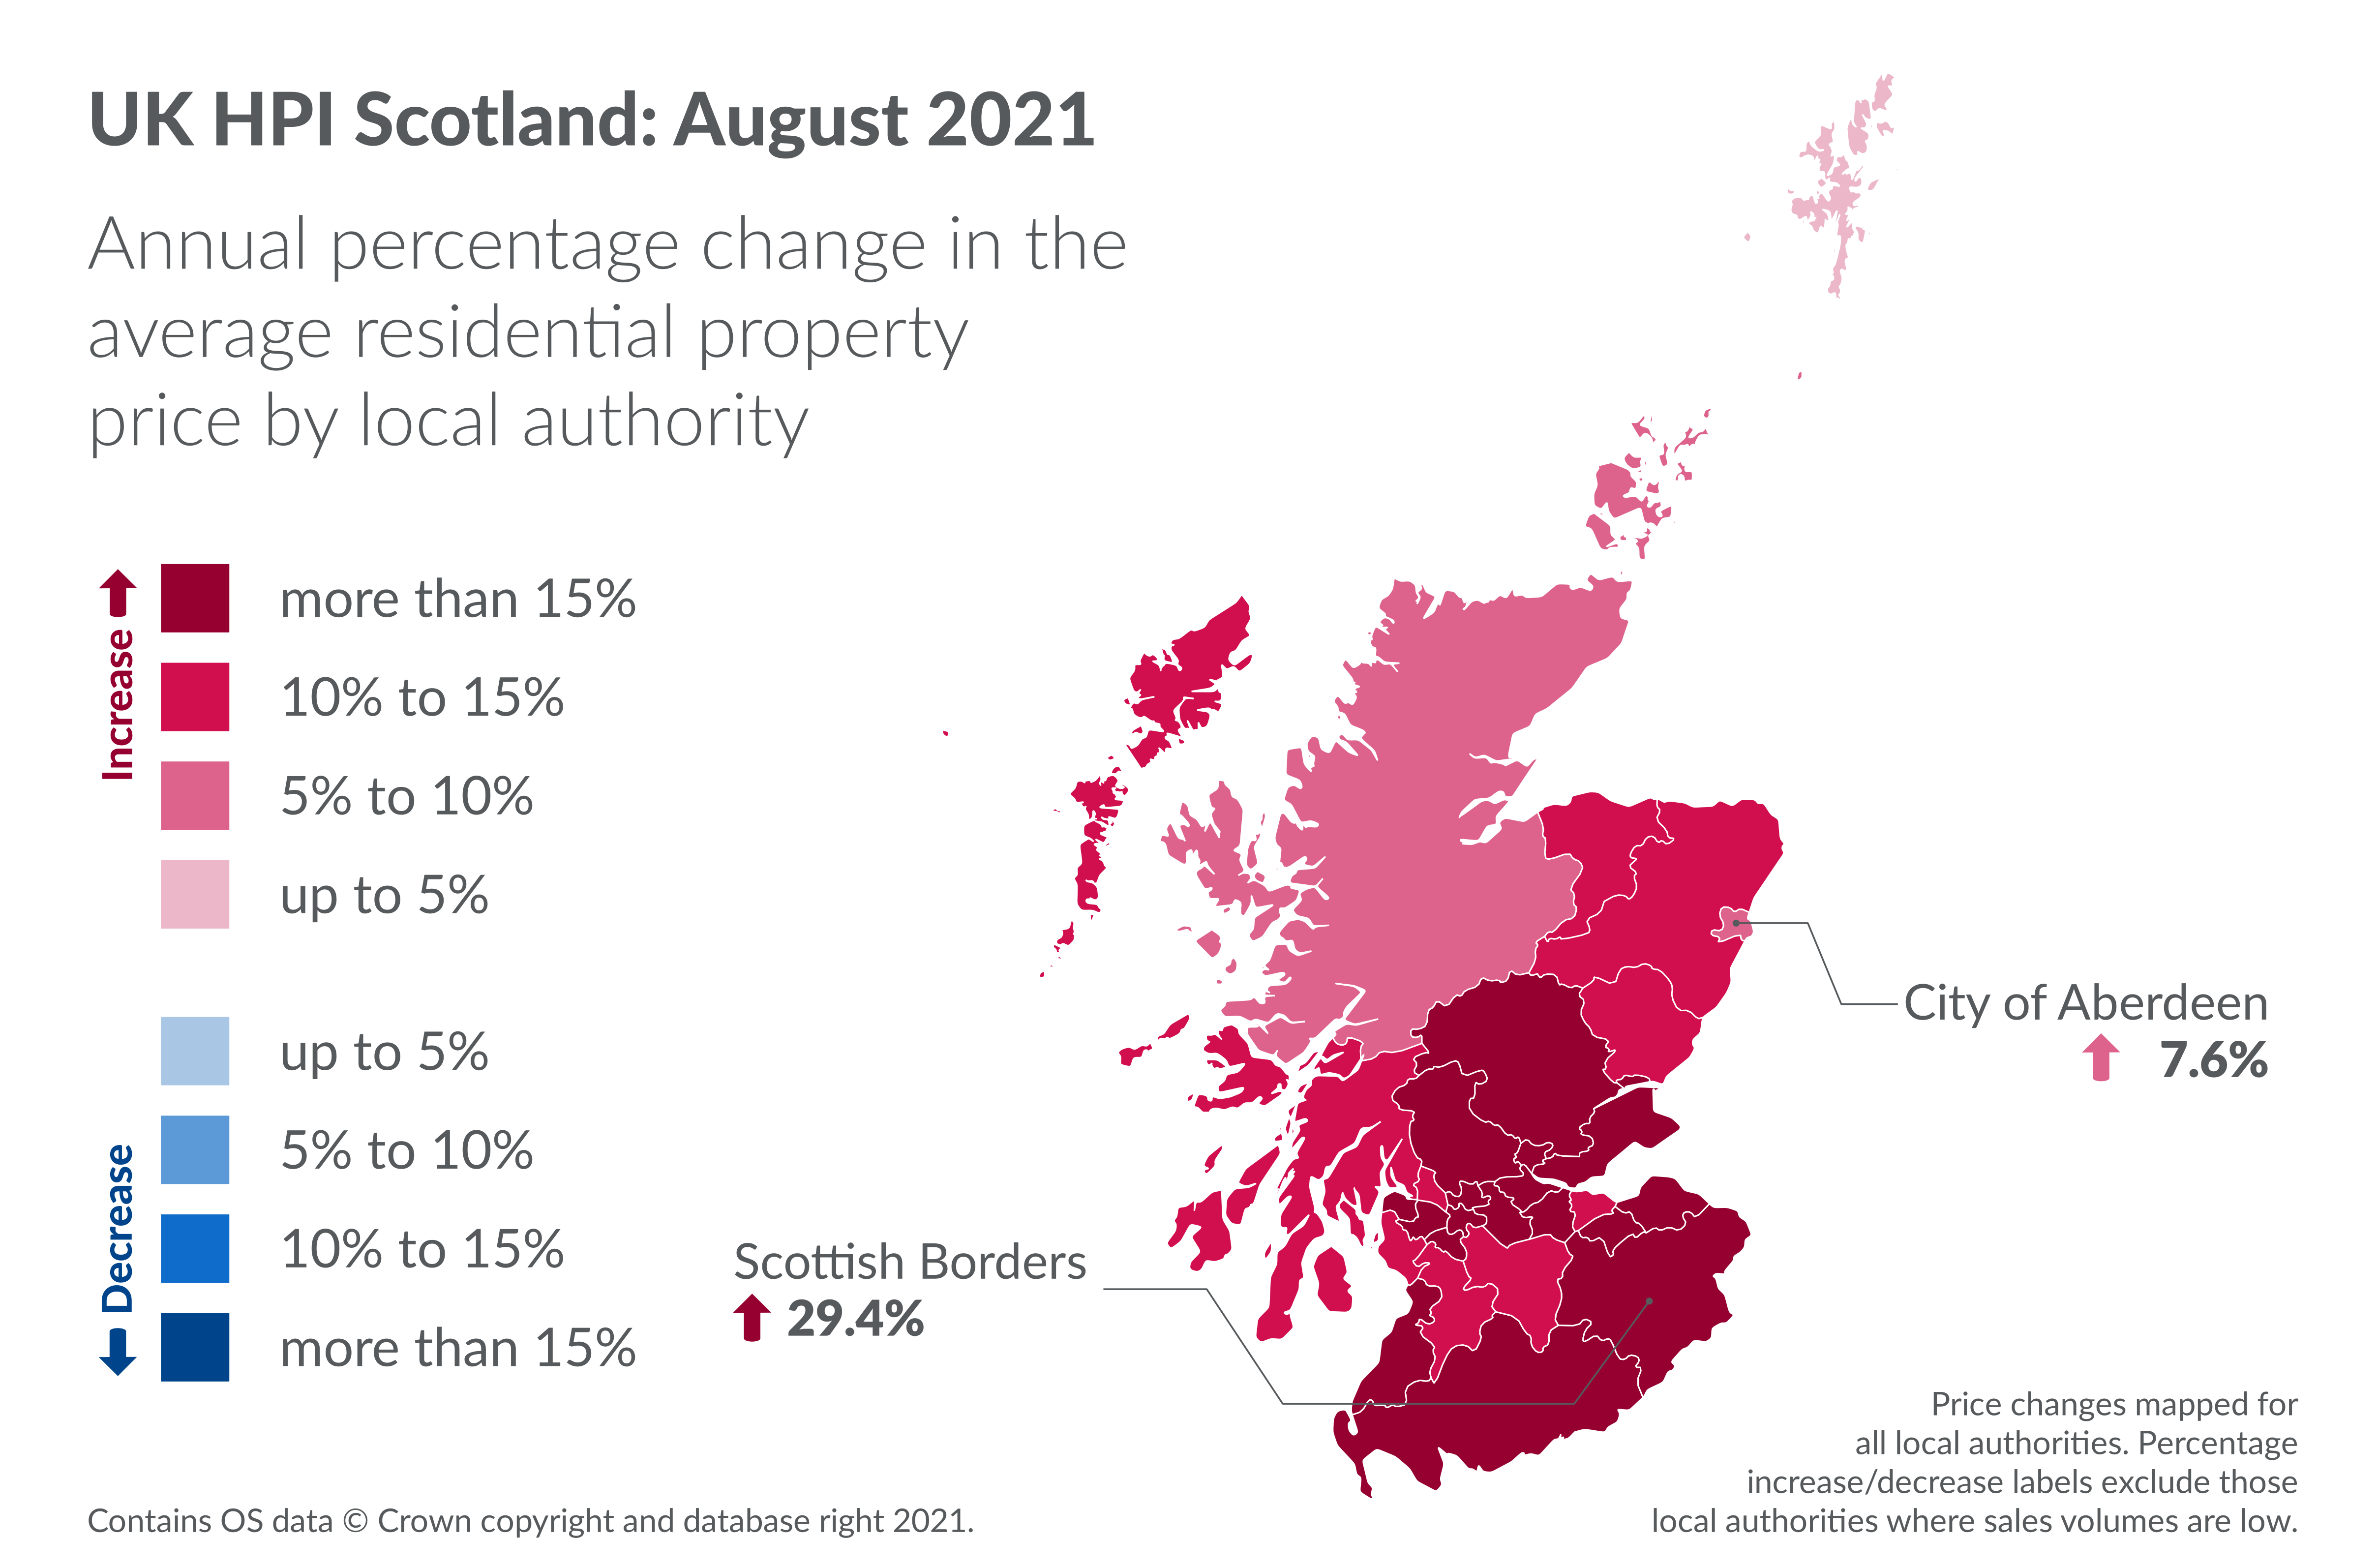 Annual percentage change in the average residential property price by local authority August 2021